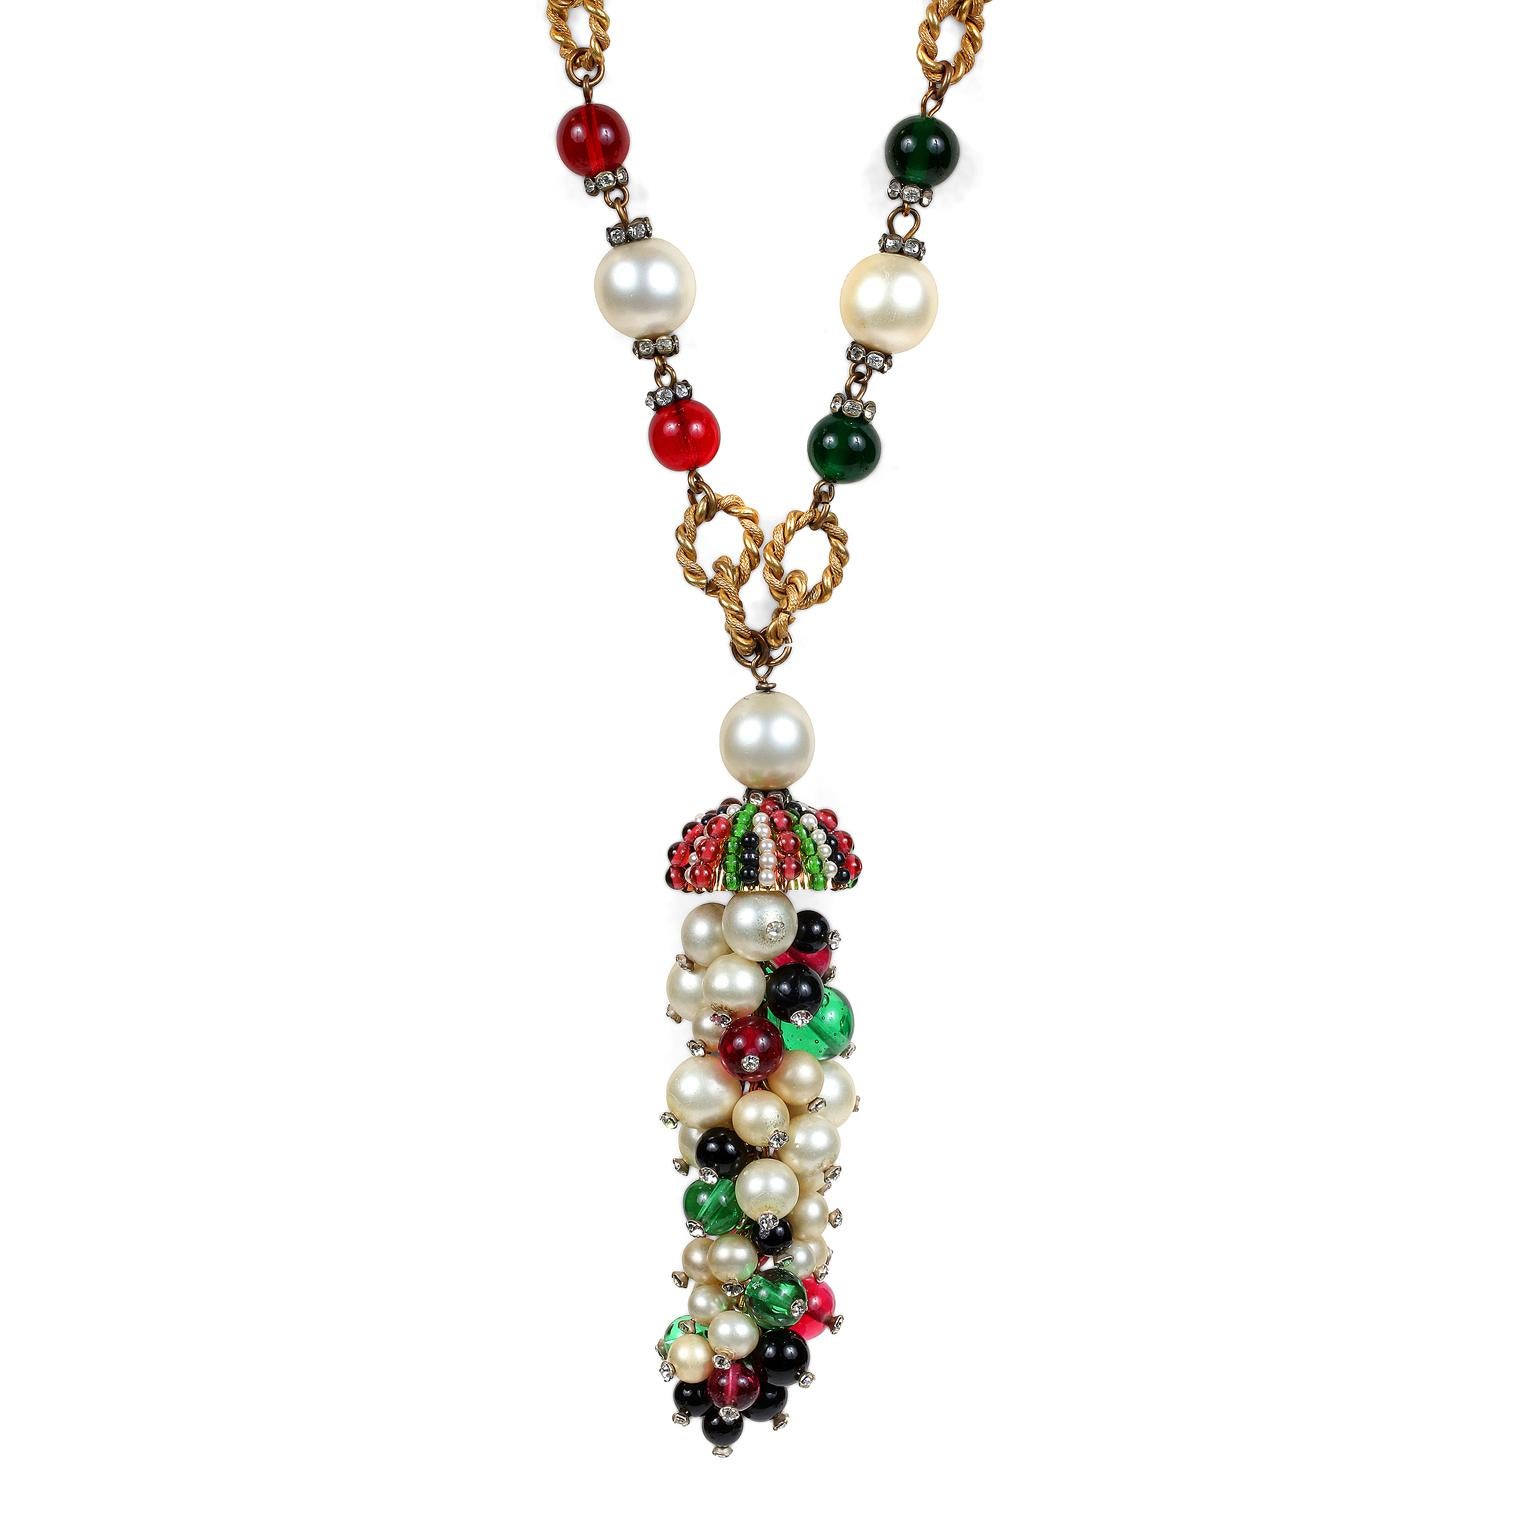 This authentic Chanel Gripoix and Pearl Domed Pendant Necklace is in excellent vintage condition from the 1950’s.  Red and green Gripoix glass beads and faux pearls are situated on a gold tone twisted link chain.  Stunning domed pendant cluster of